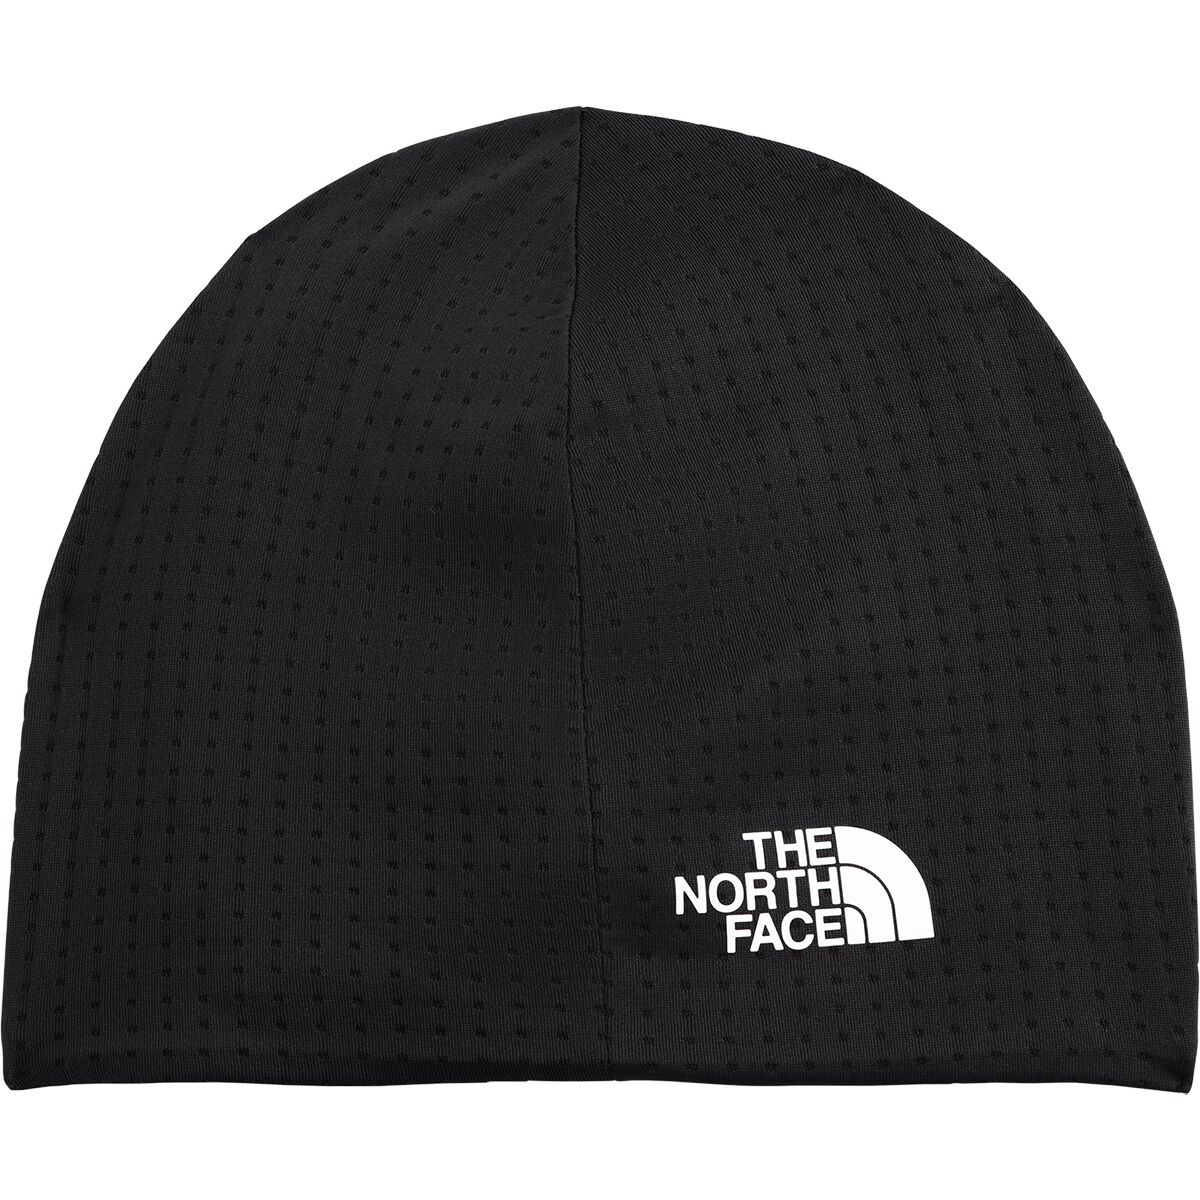 The North Face Fastech Beanie